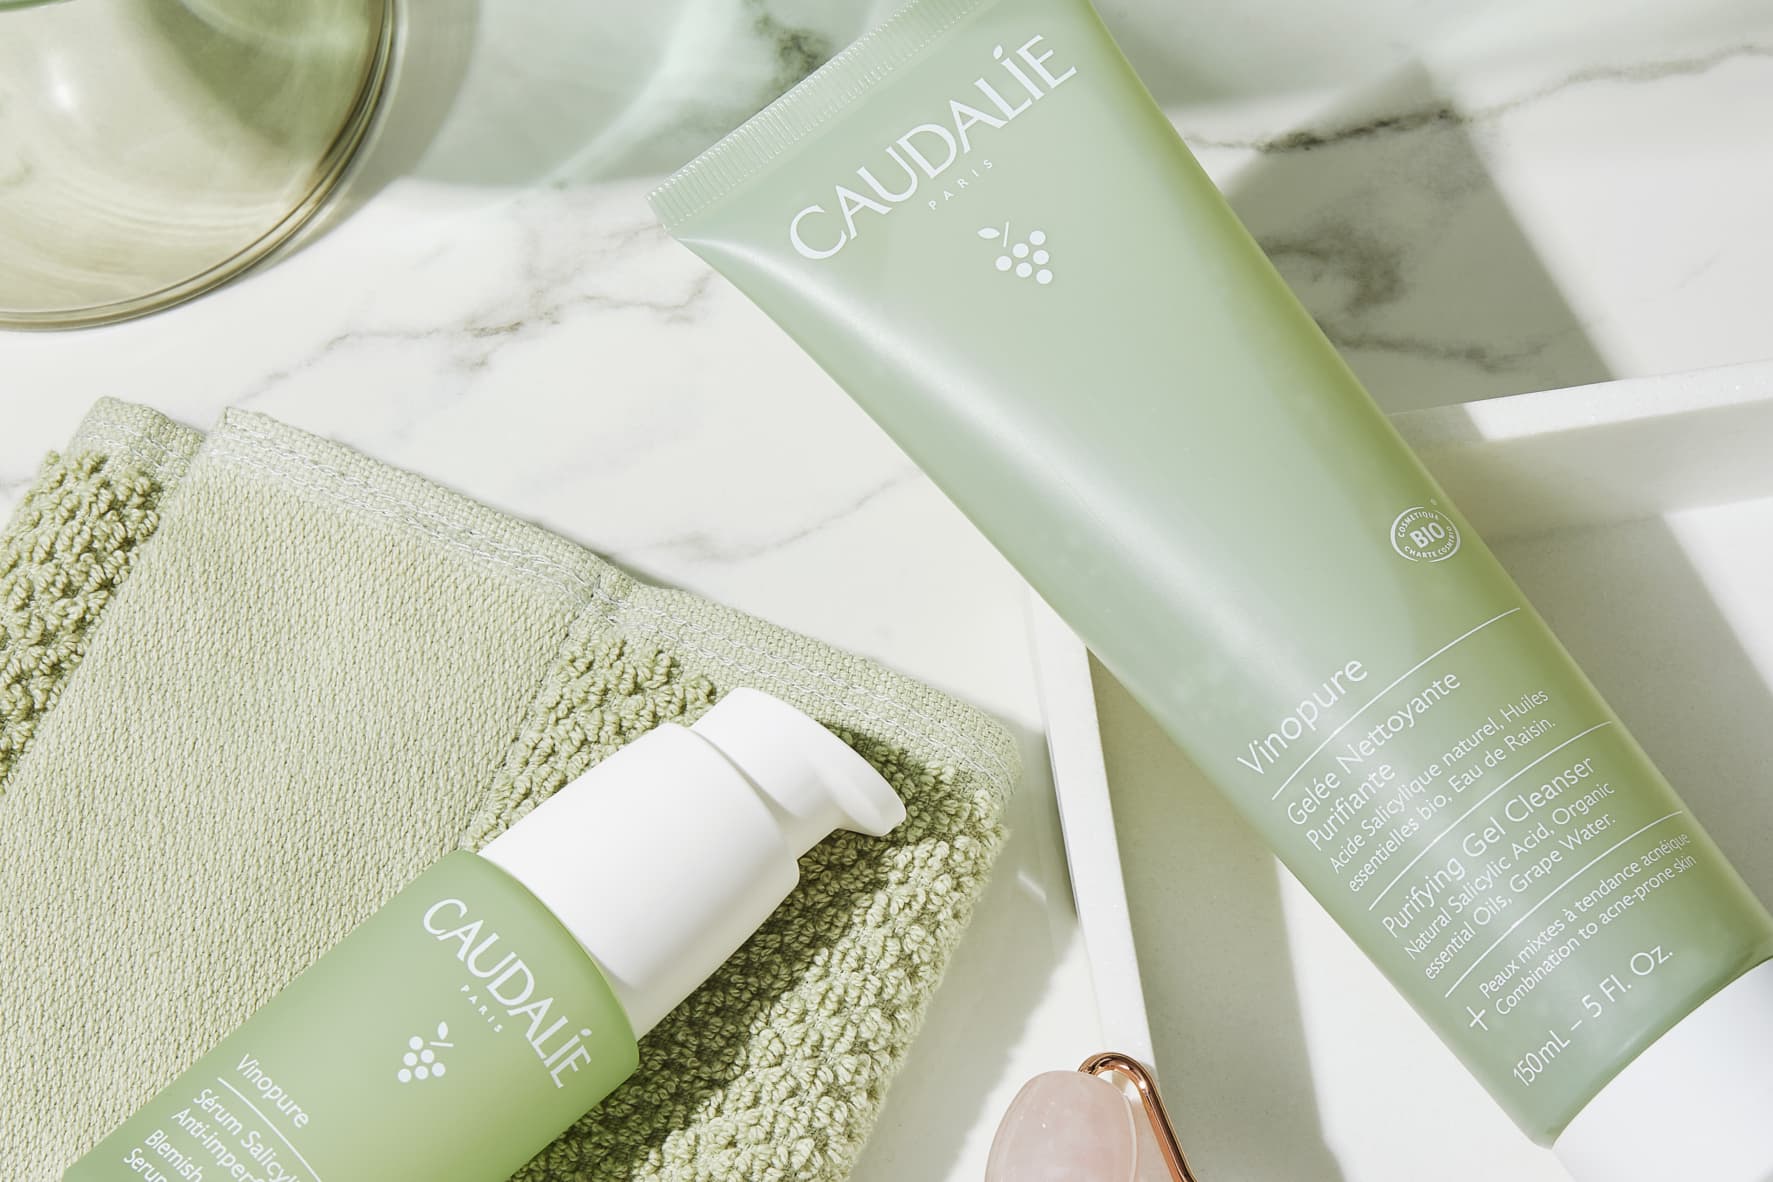 5 Of The Best Caudalie Products To Try ASAP